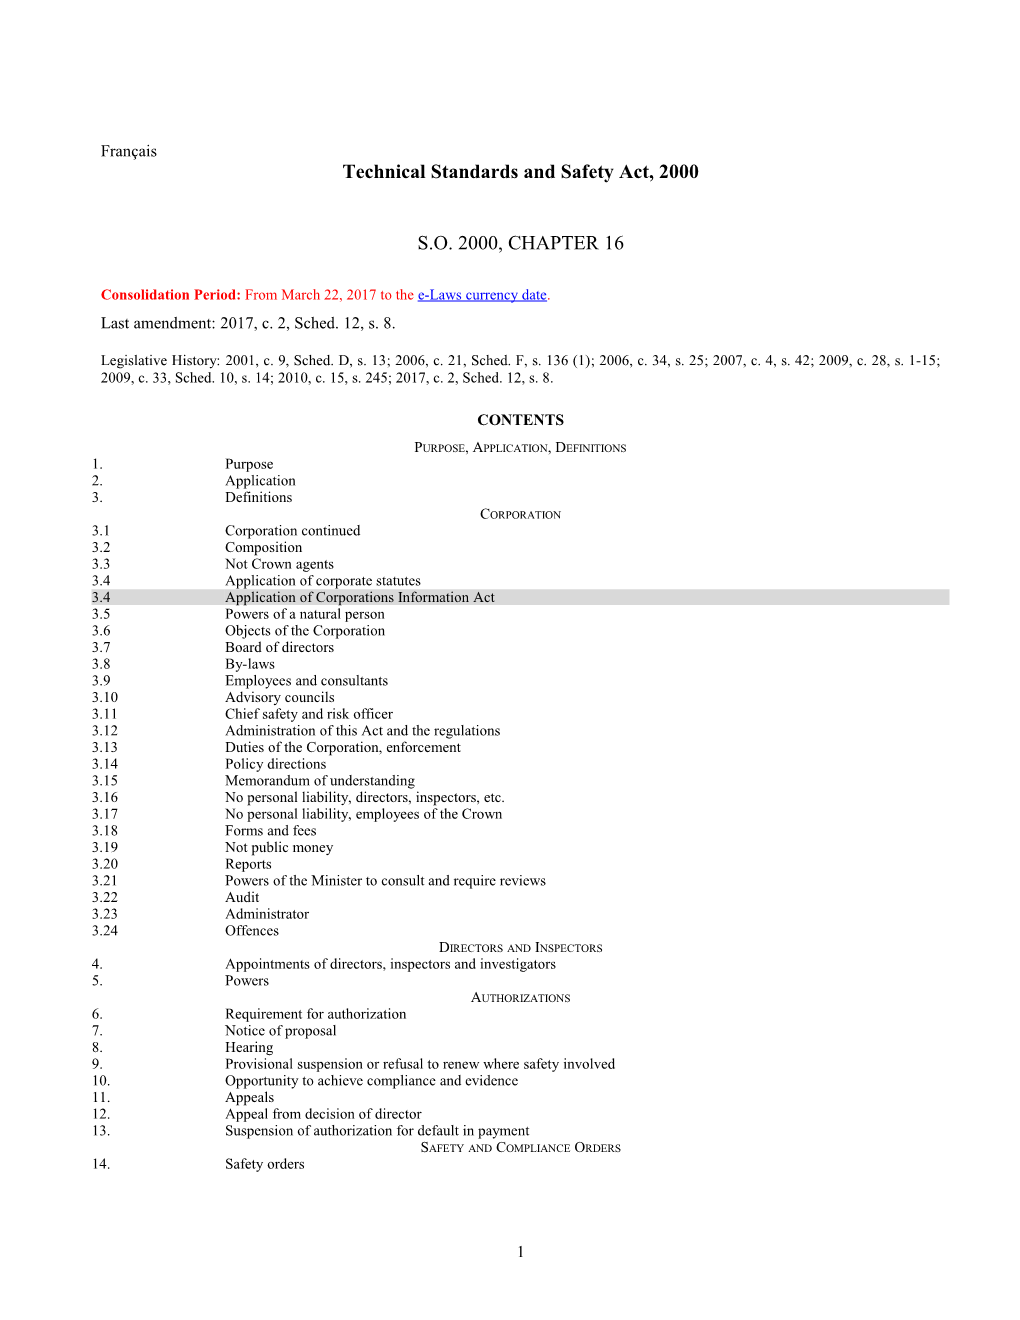 Technical Standards and Safety Act, 2000, S.O. 2000, C. 16